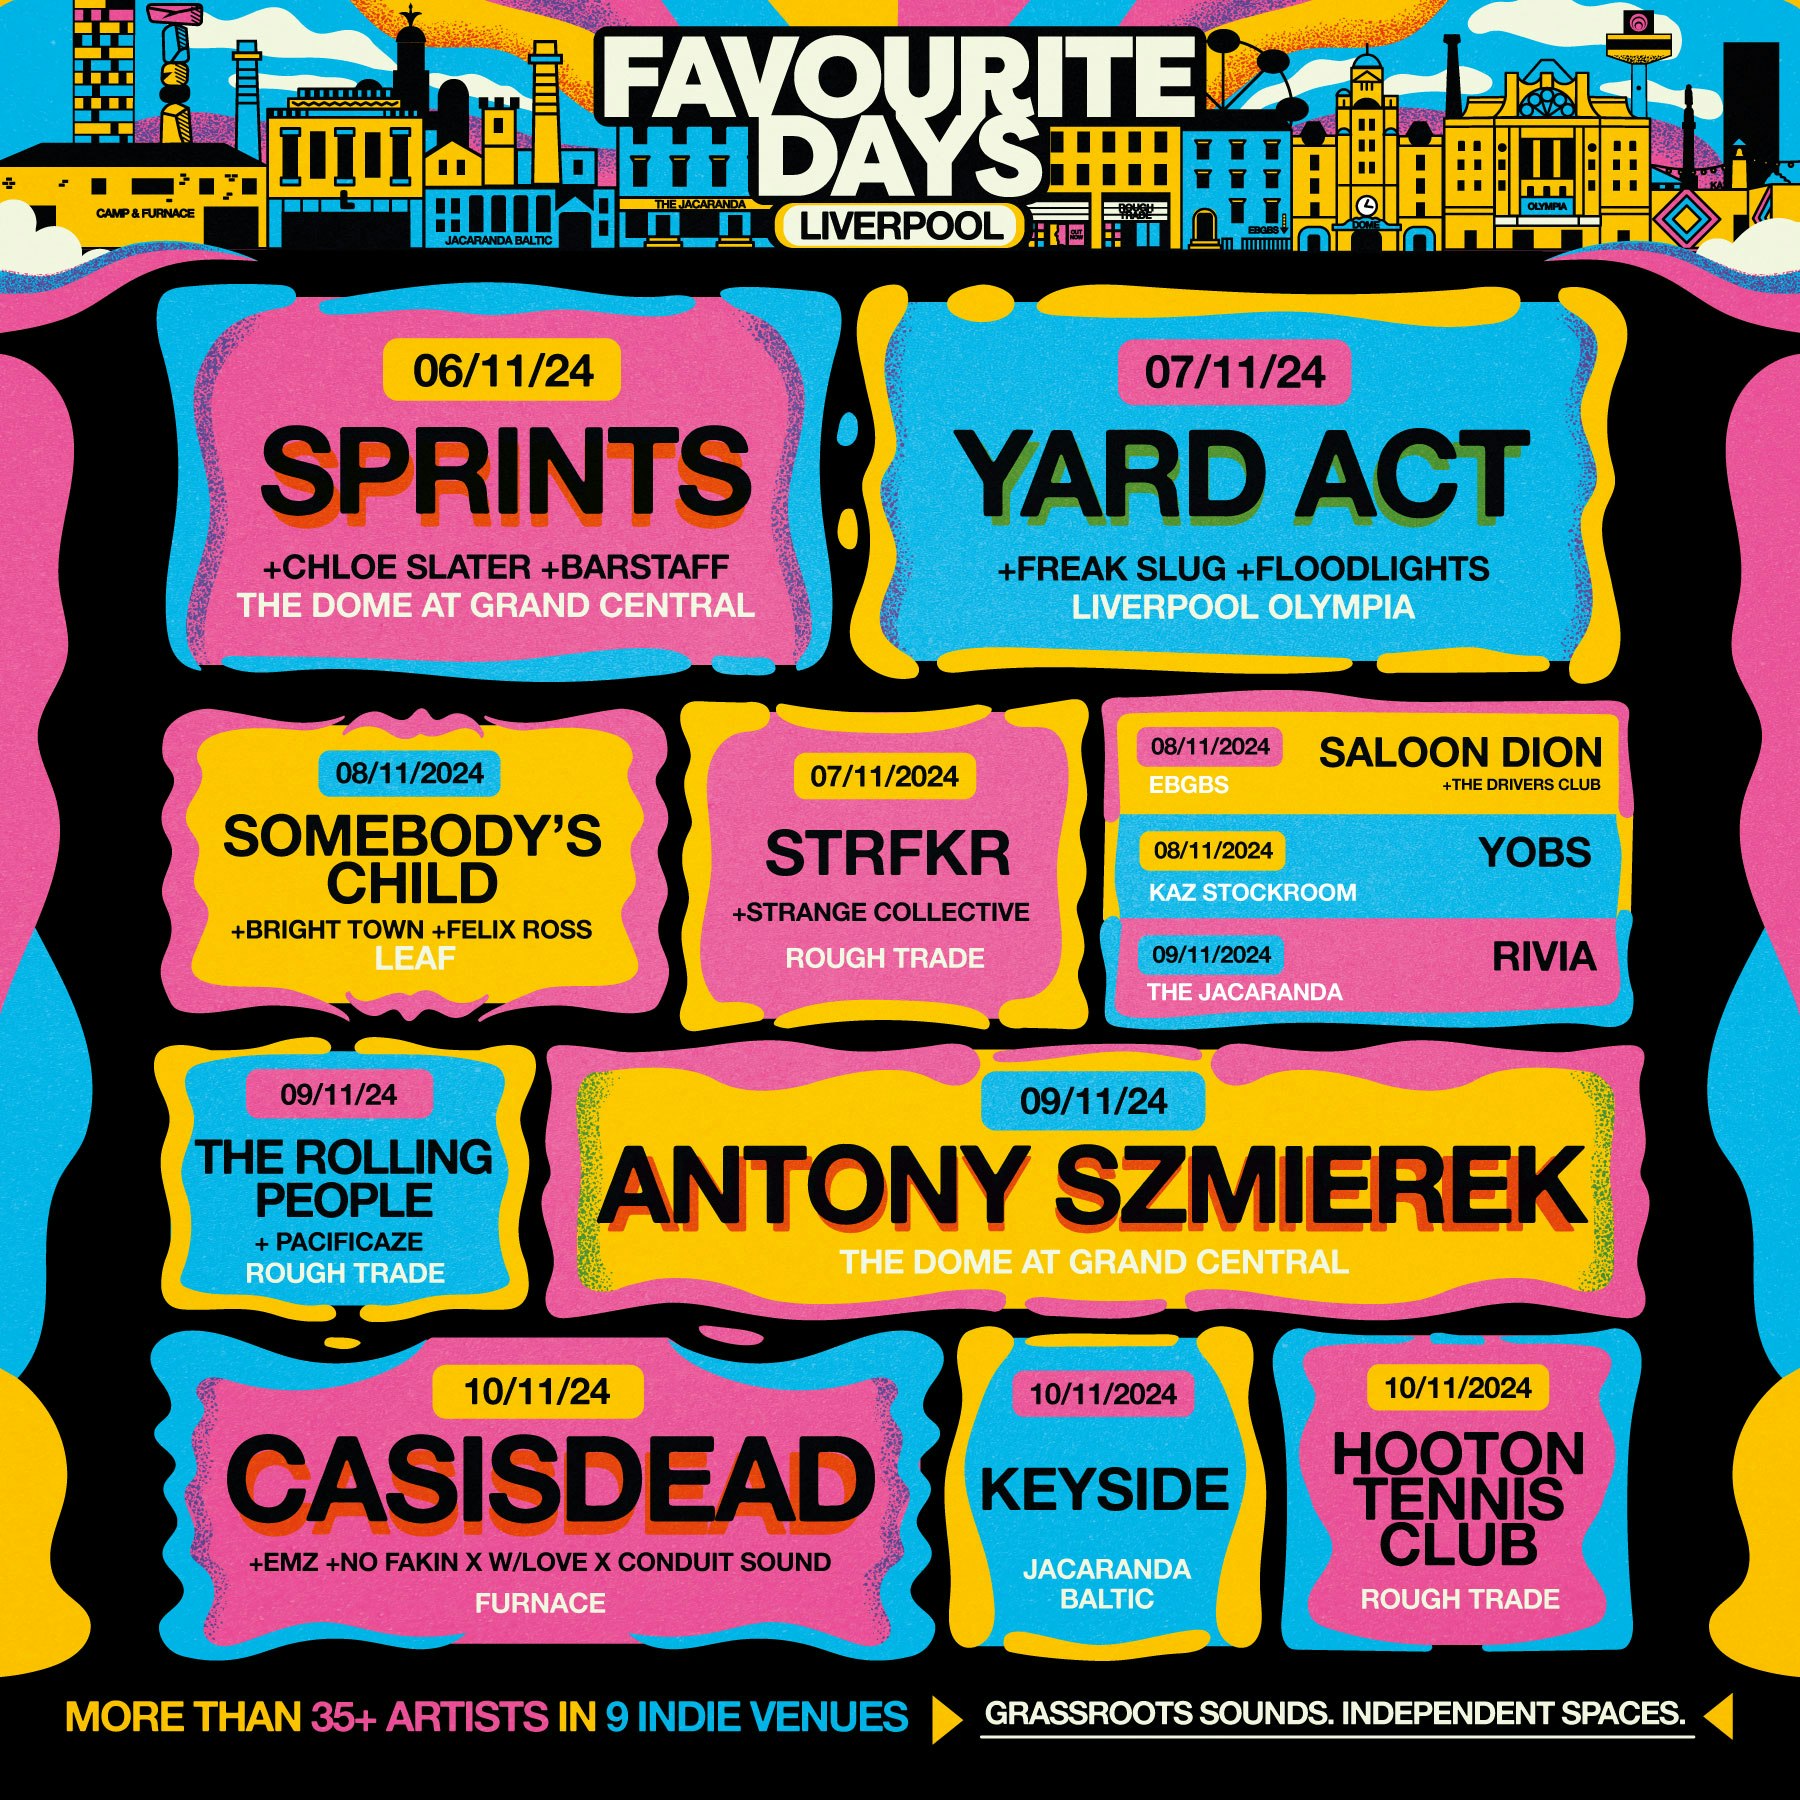 FAVOURITE DAYS FESTIVAL YOBS + Support